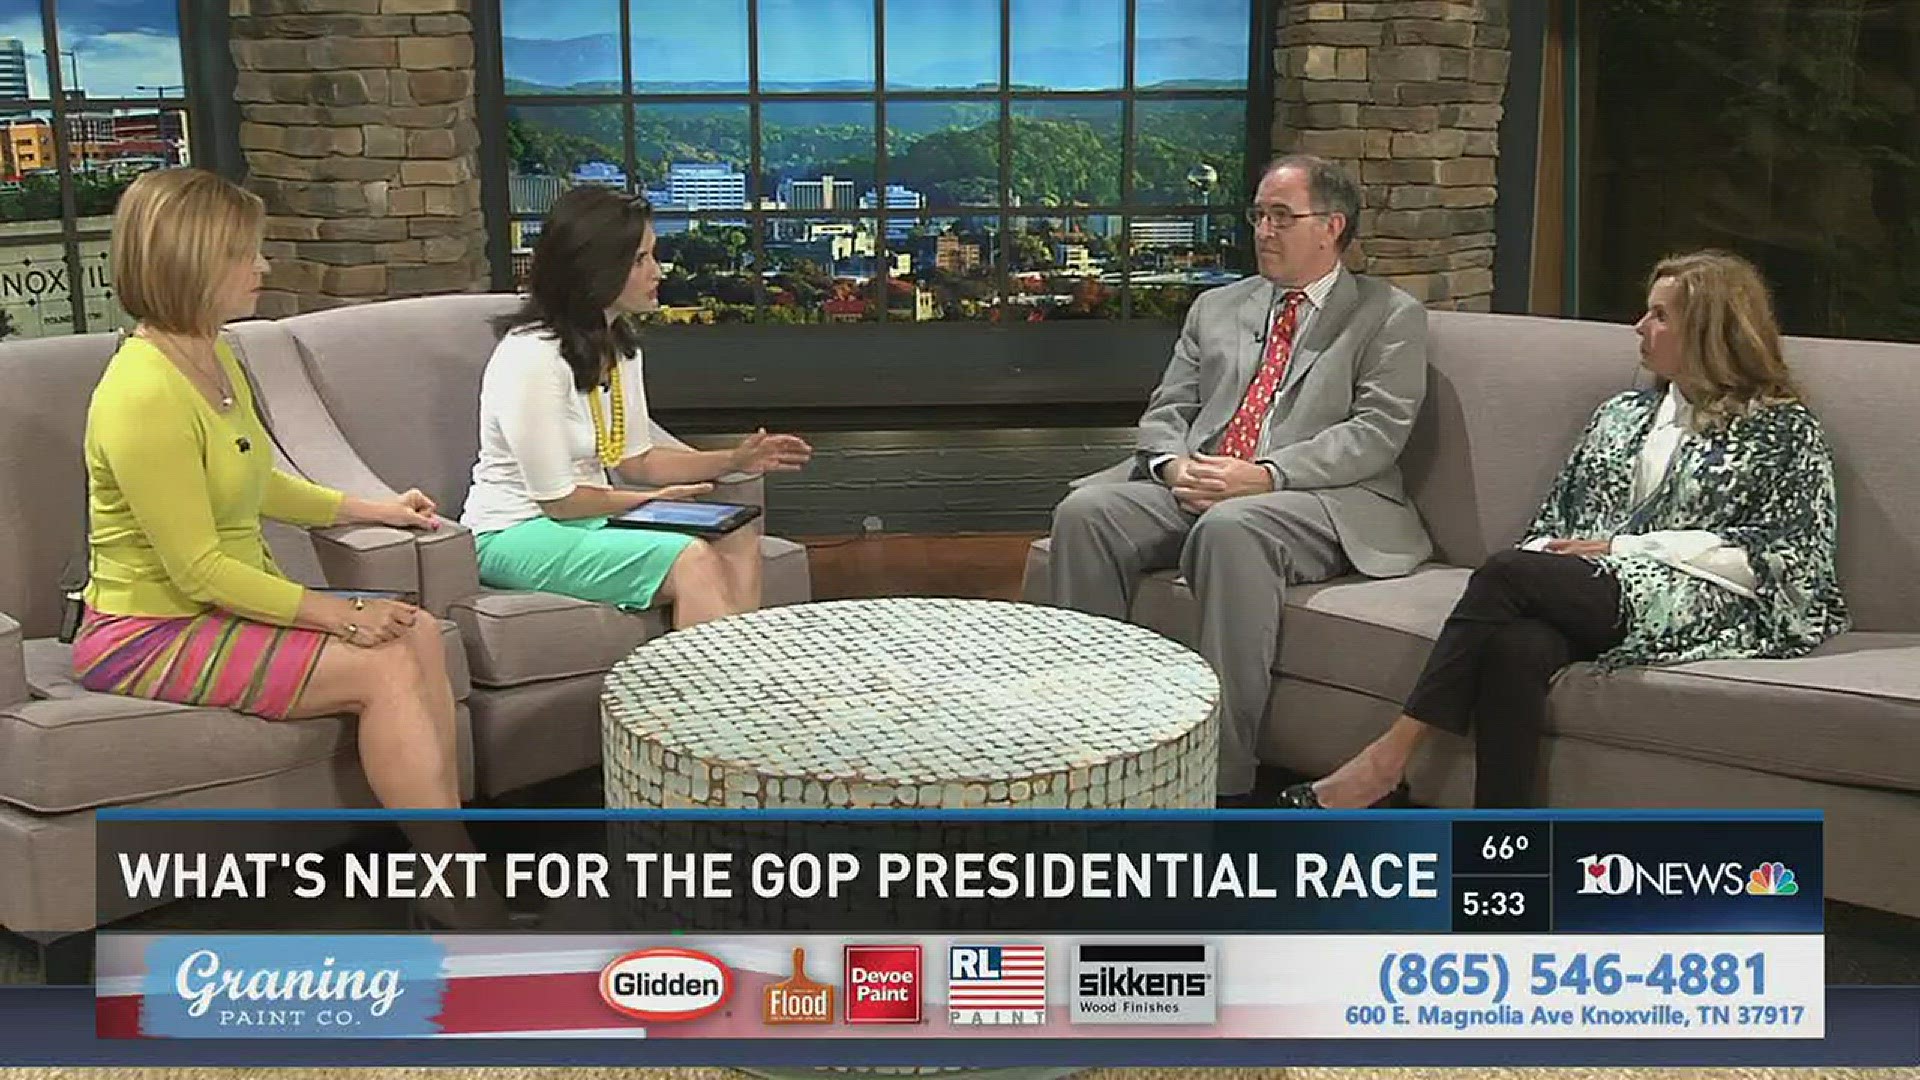 Donald Trump appears to be the last man standing in the race for the GOP presidential nomination. What is next for the party? Dr. Rich Pacelle from the University of Tennessee and Inside Tennessee panelist Susan Richardson Williams join us with their thou